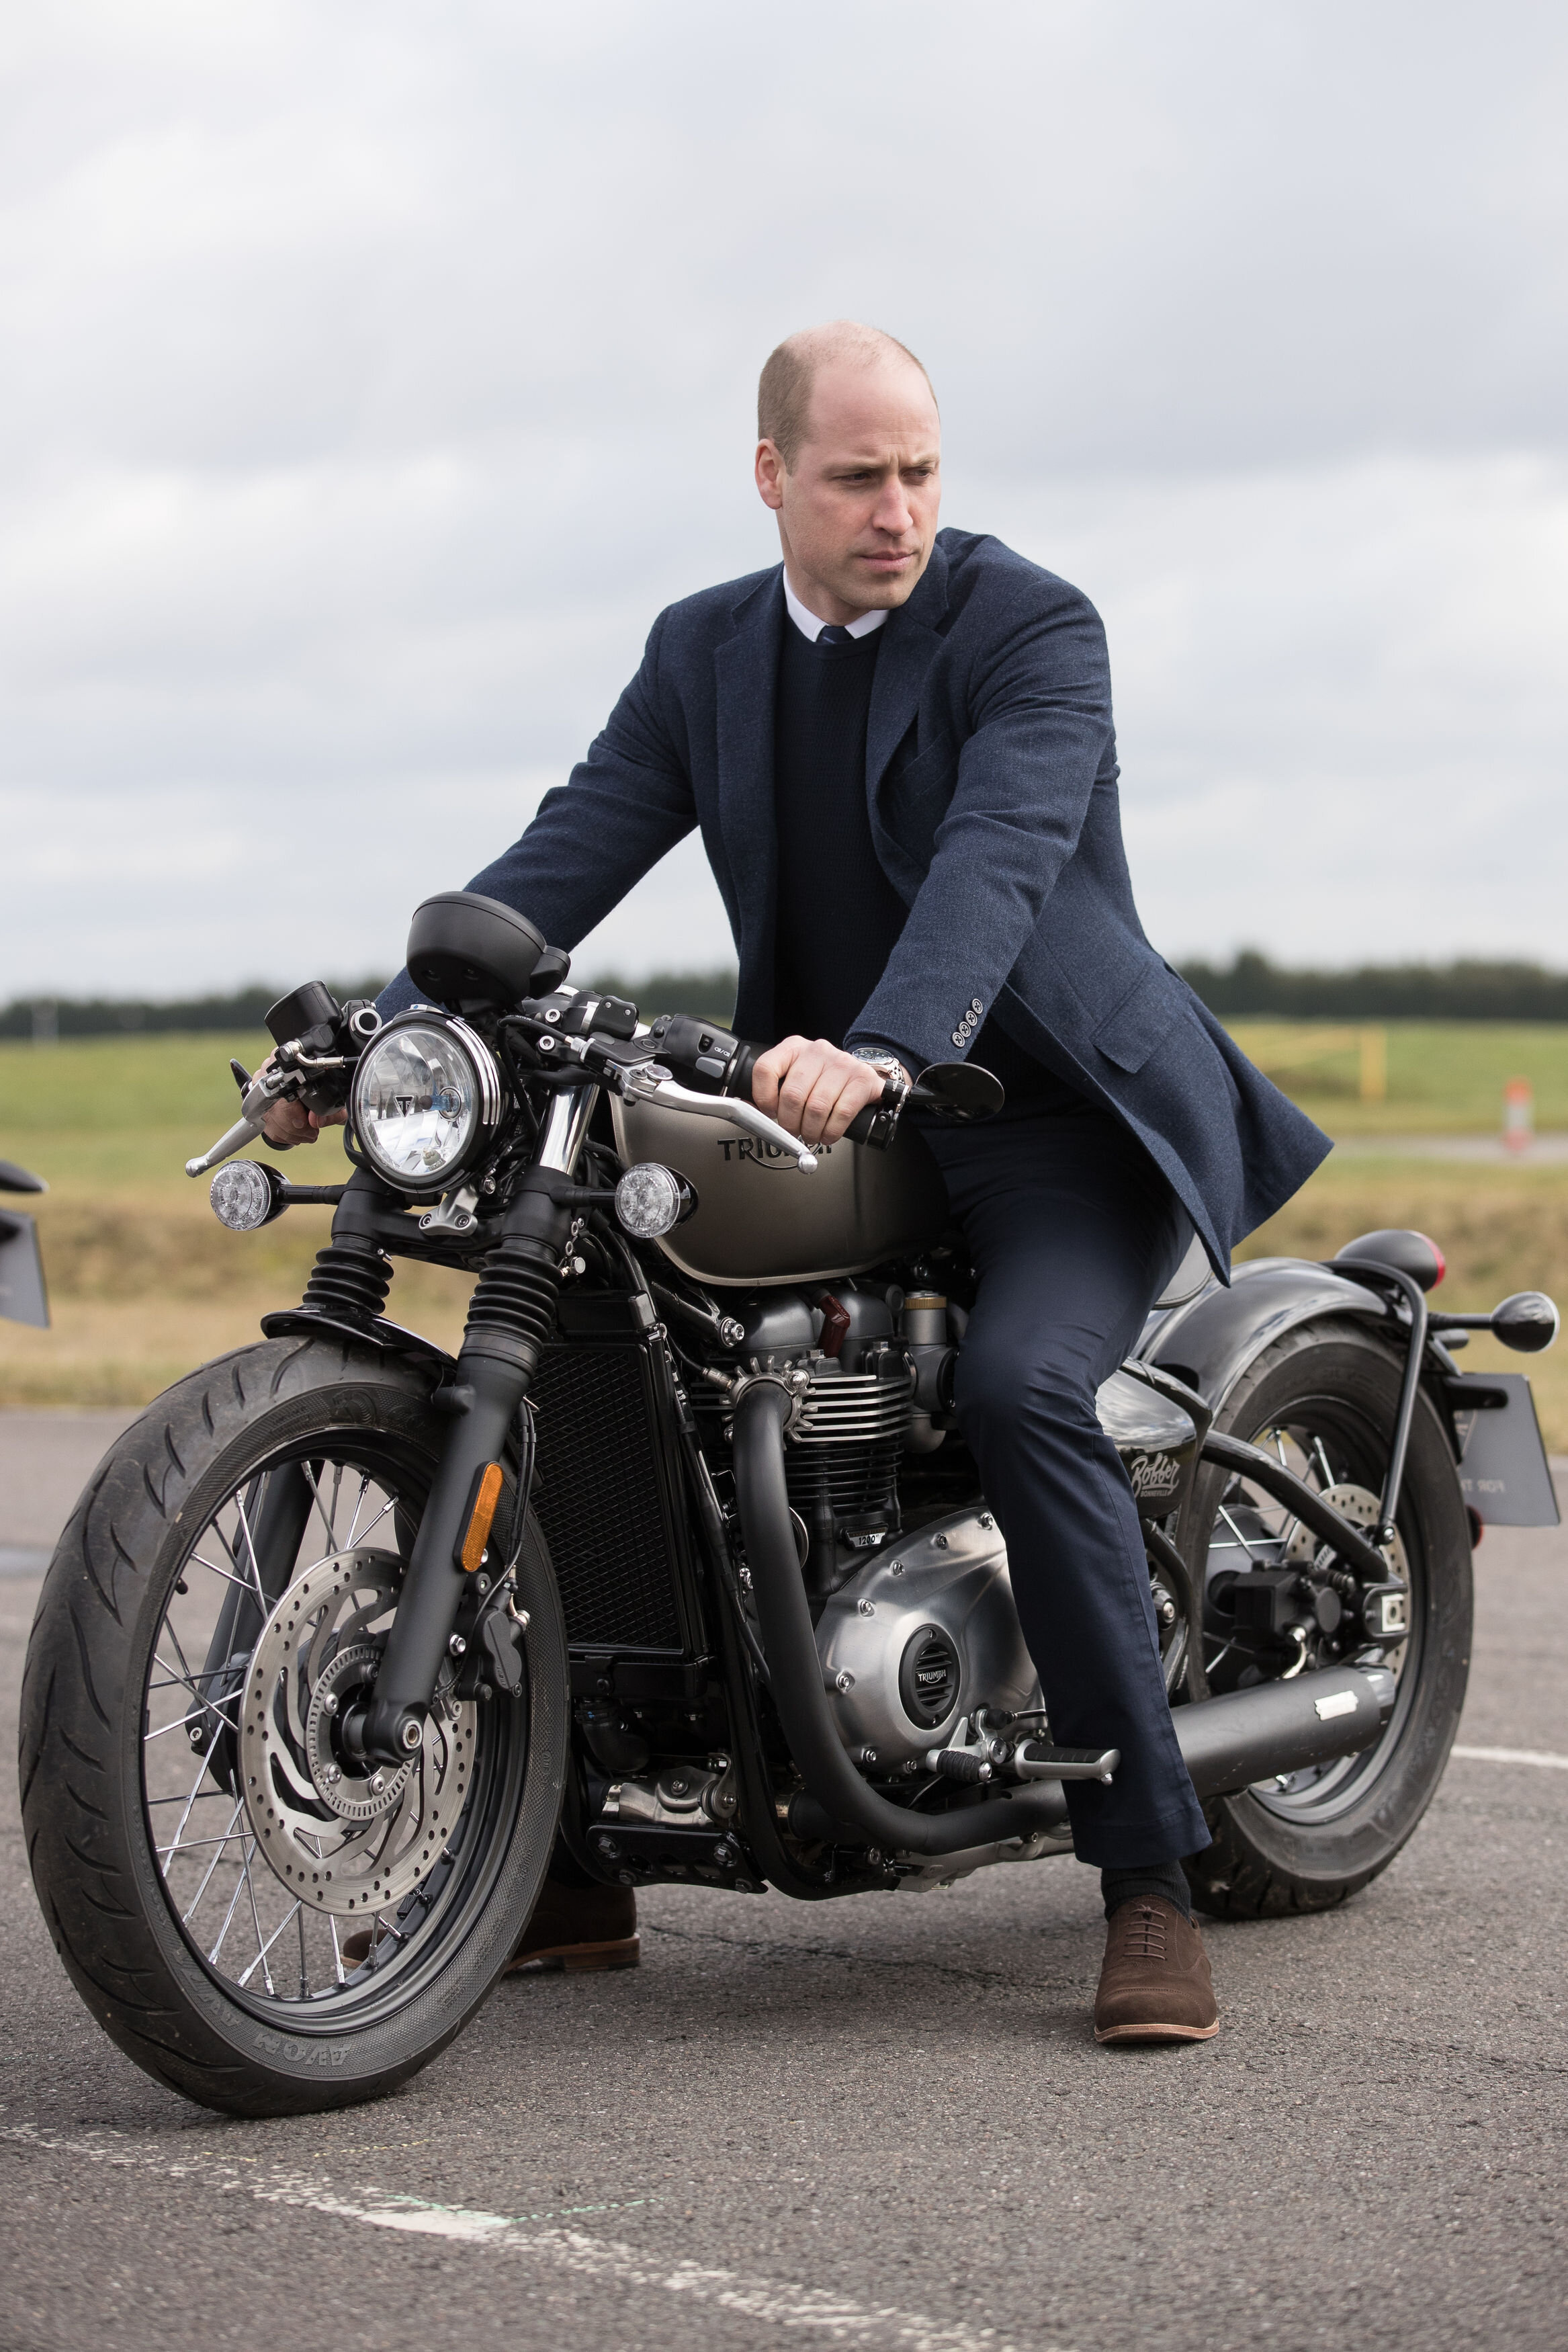  The Duke of Cambridge sits upon a Triumph Bobber motorcycle during a visit to the MIRA Technology Park in Nuneaton, Warwickshire, which supplies pioneering engineering, research and test services to the transport industry. MIRA was formerly known as